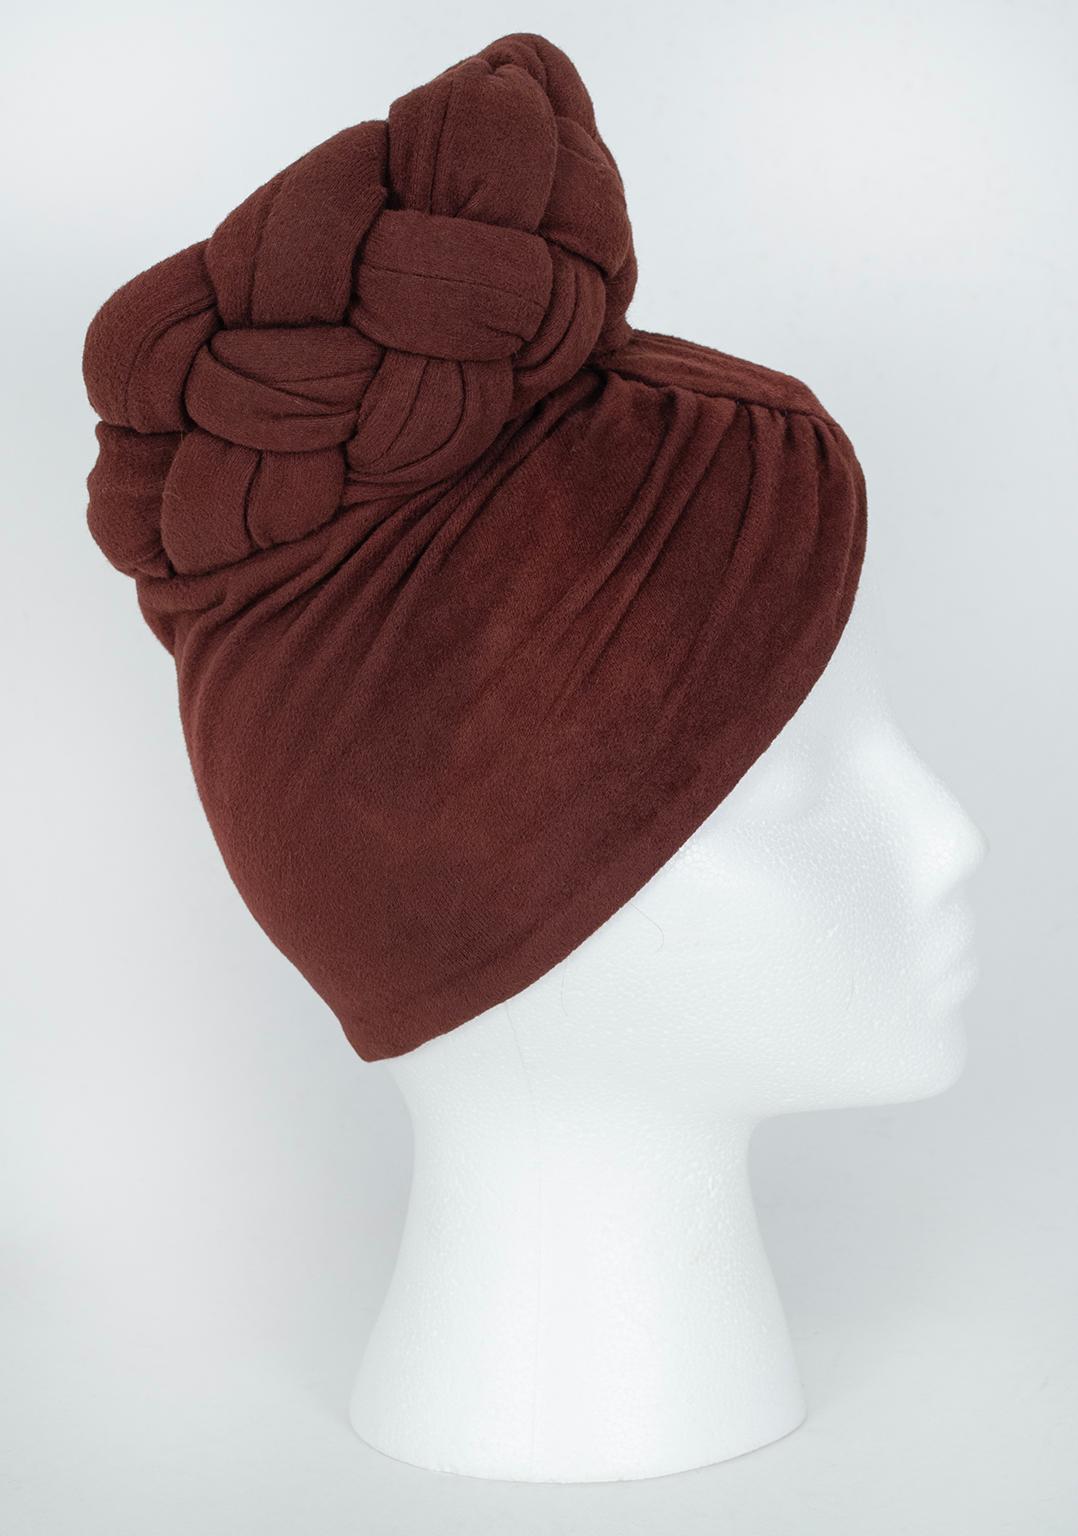 Women's Chocolate Brown Skullcap Statement Turban with Tall Braided Crown – O/S, 1940s